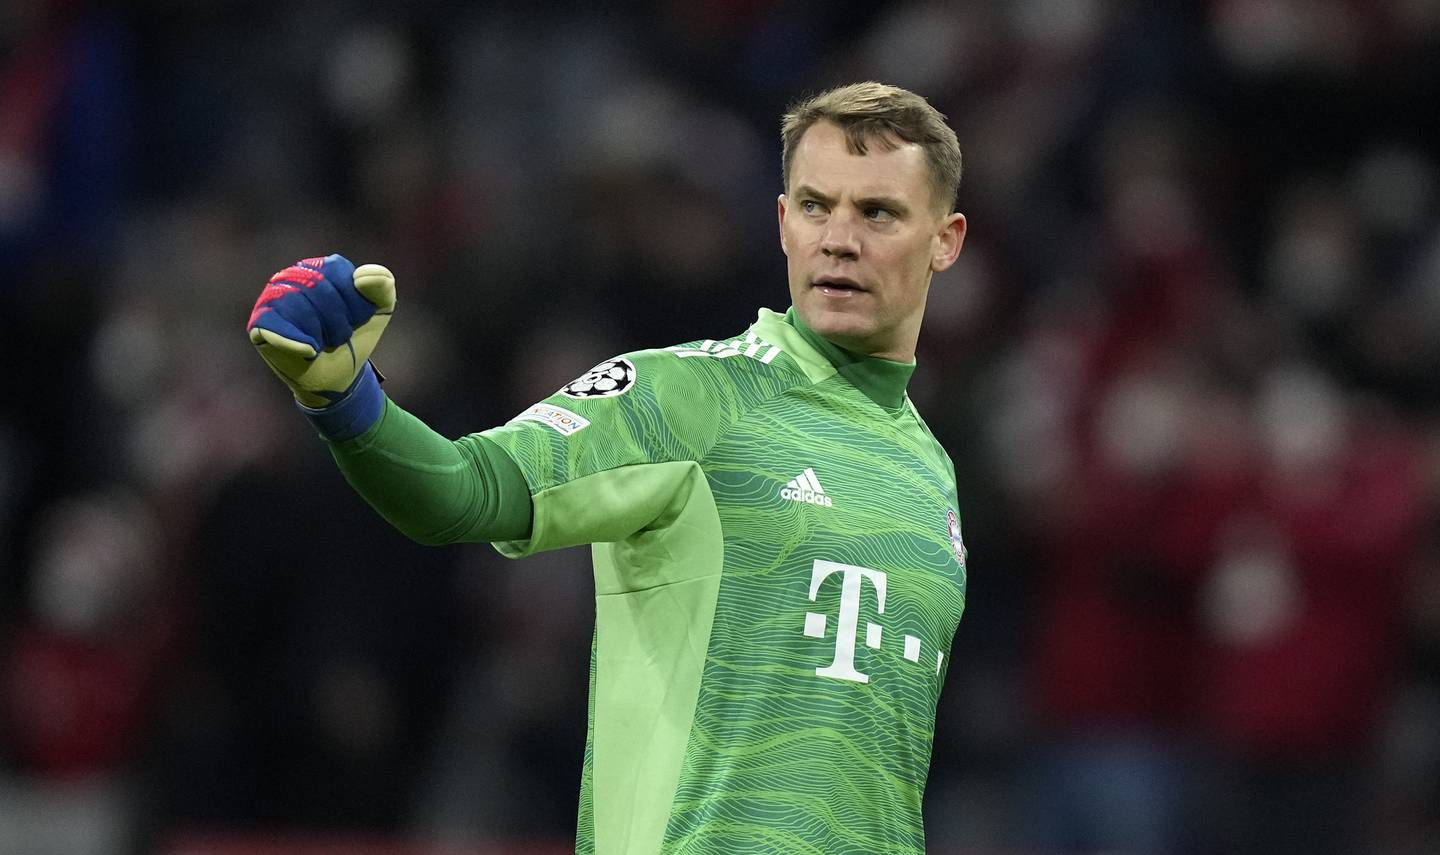 Bayern Munich goalkeeper Manuel Neuer broke his leg during a skiing accident following Germany's exit at the group stage of the 2022 World Cup. AP Photo 